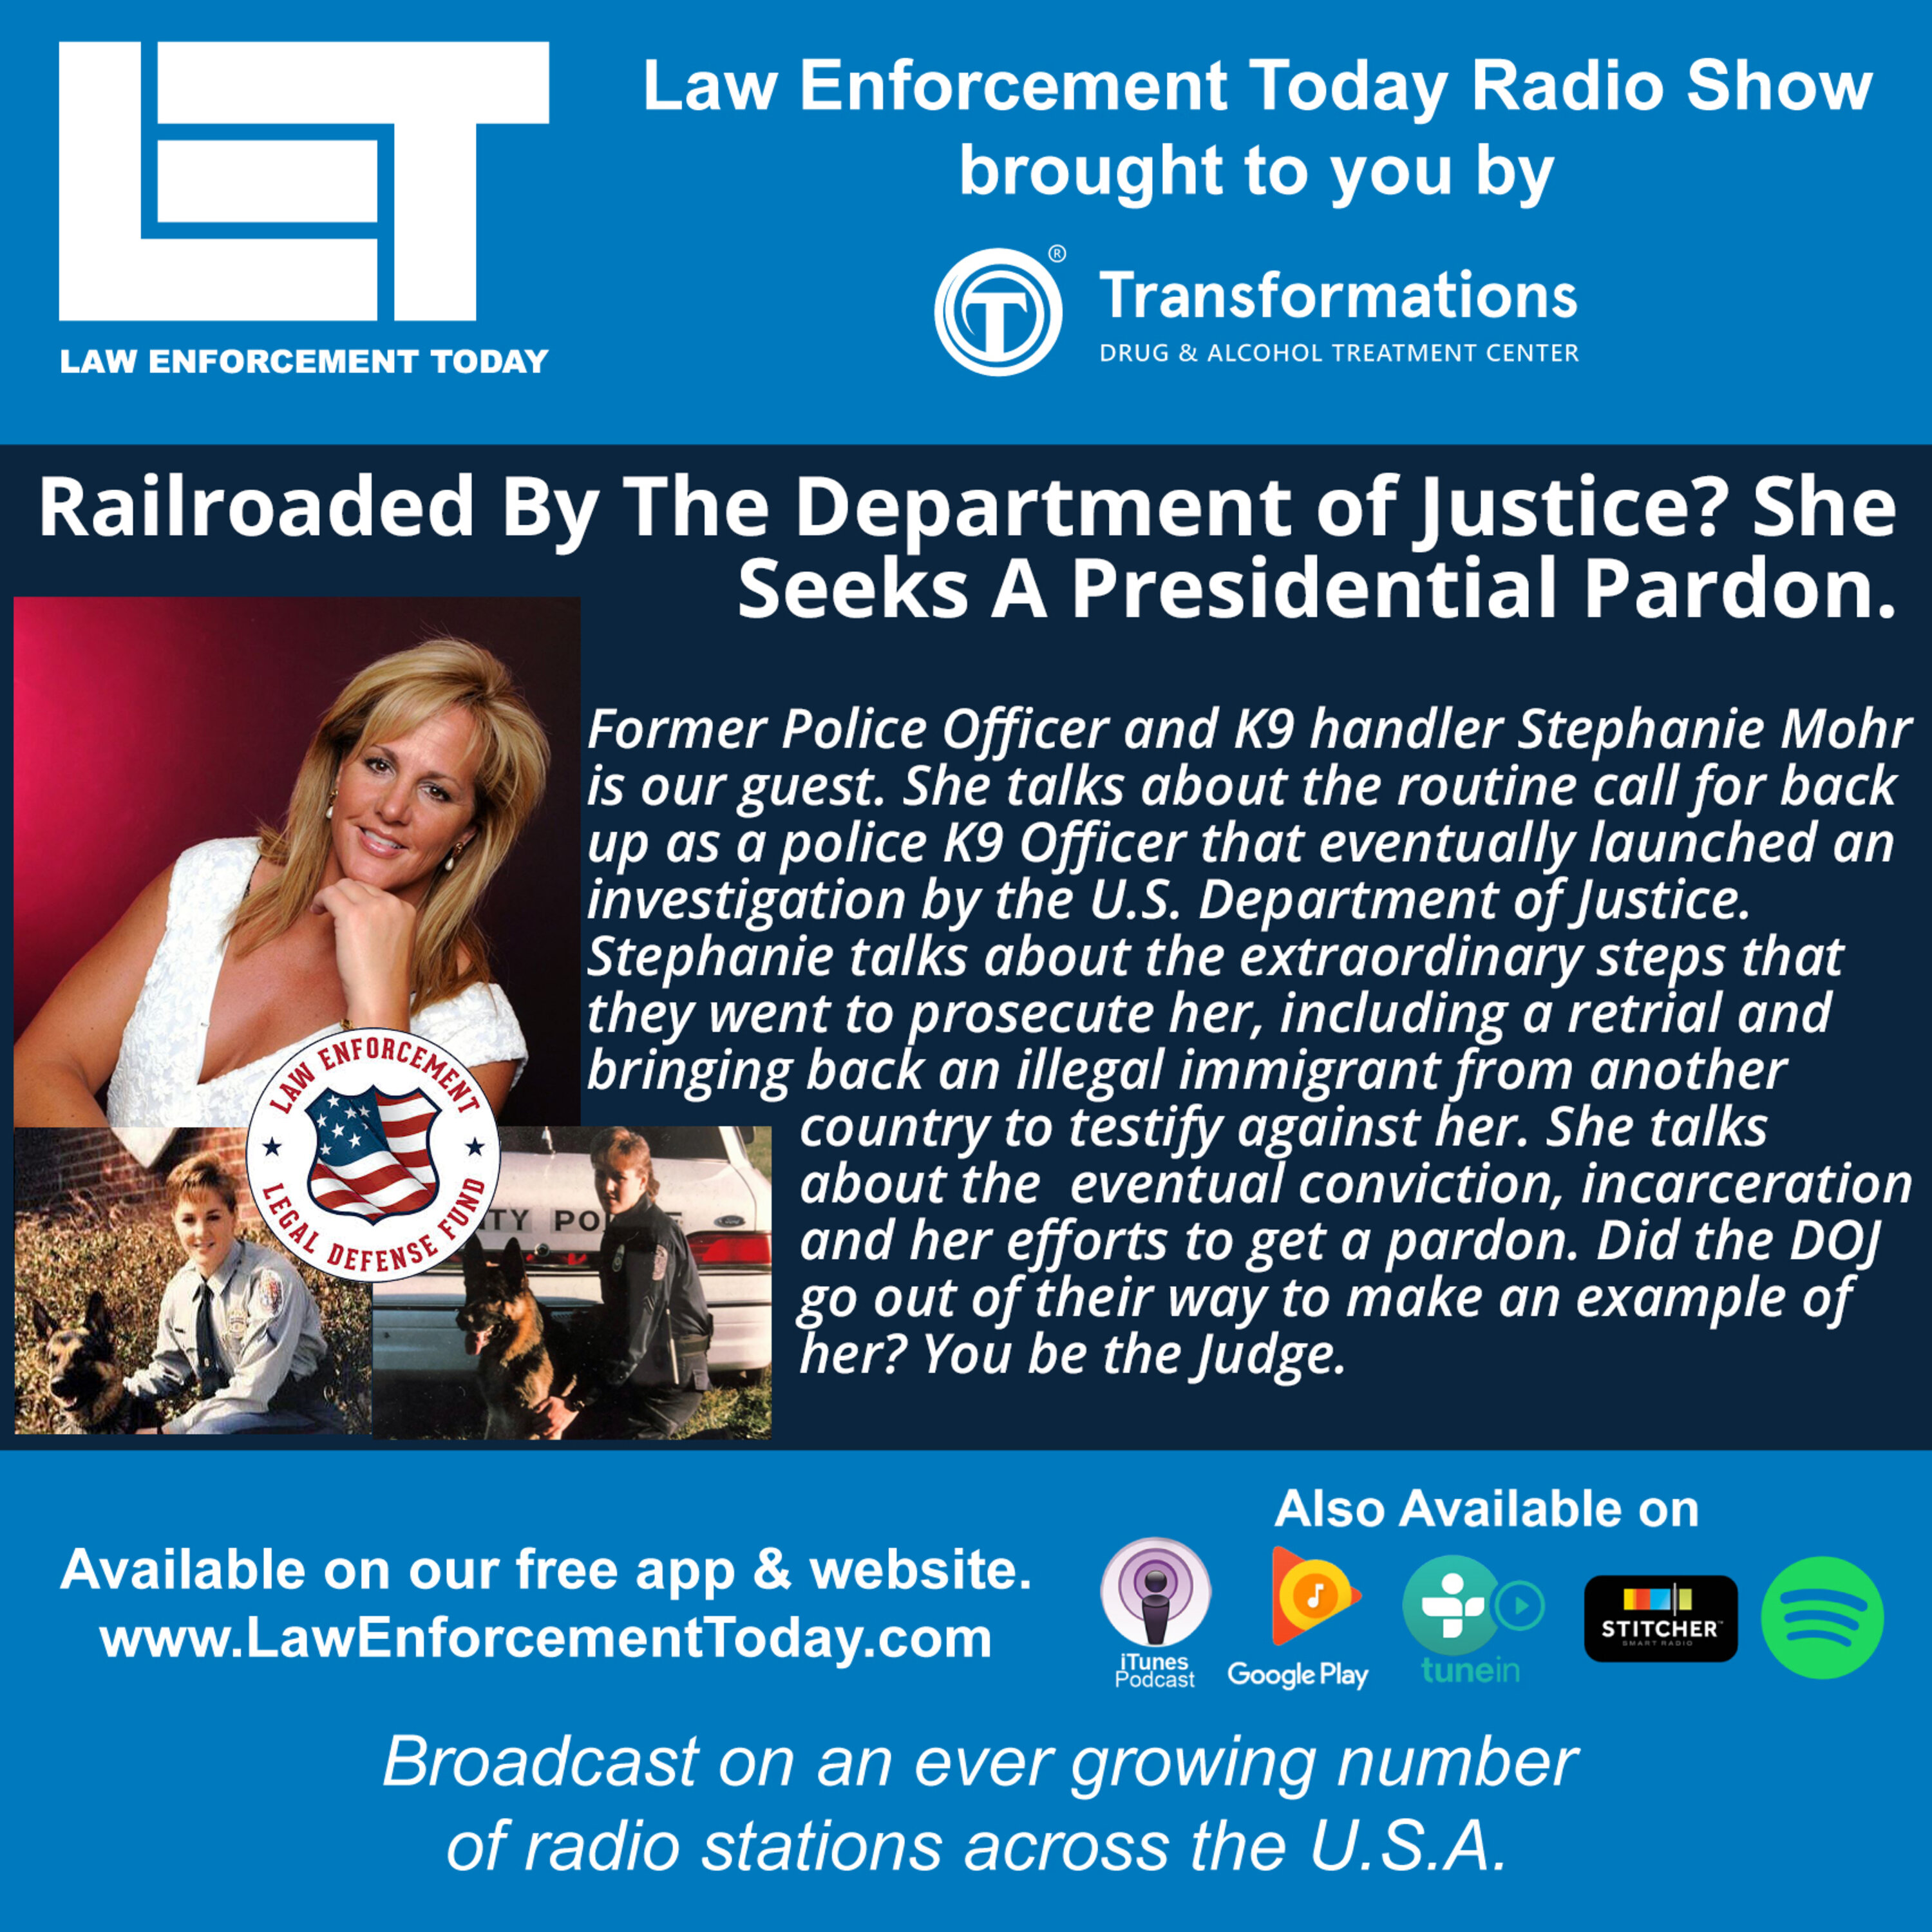 S4E20: Railroaded By The Department of Justice? She Got A Presidential Pardon After Serving 10 Years..